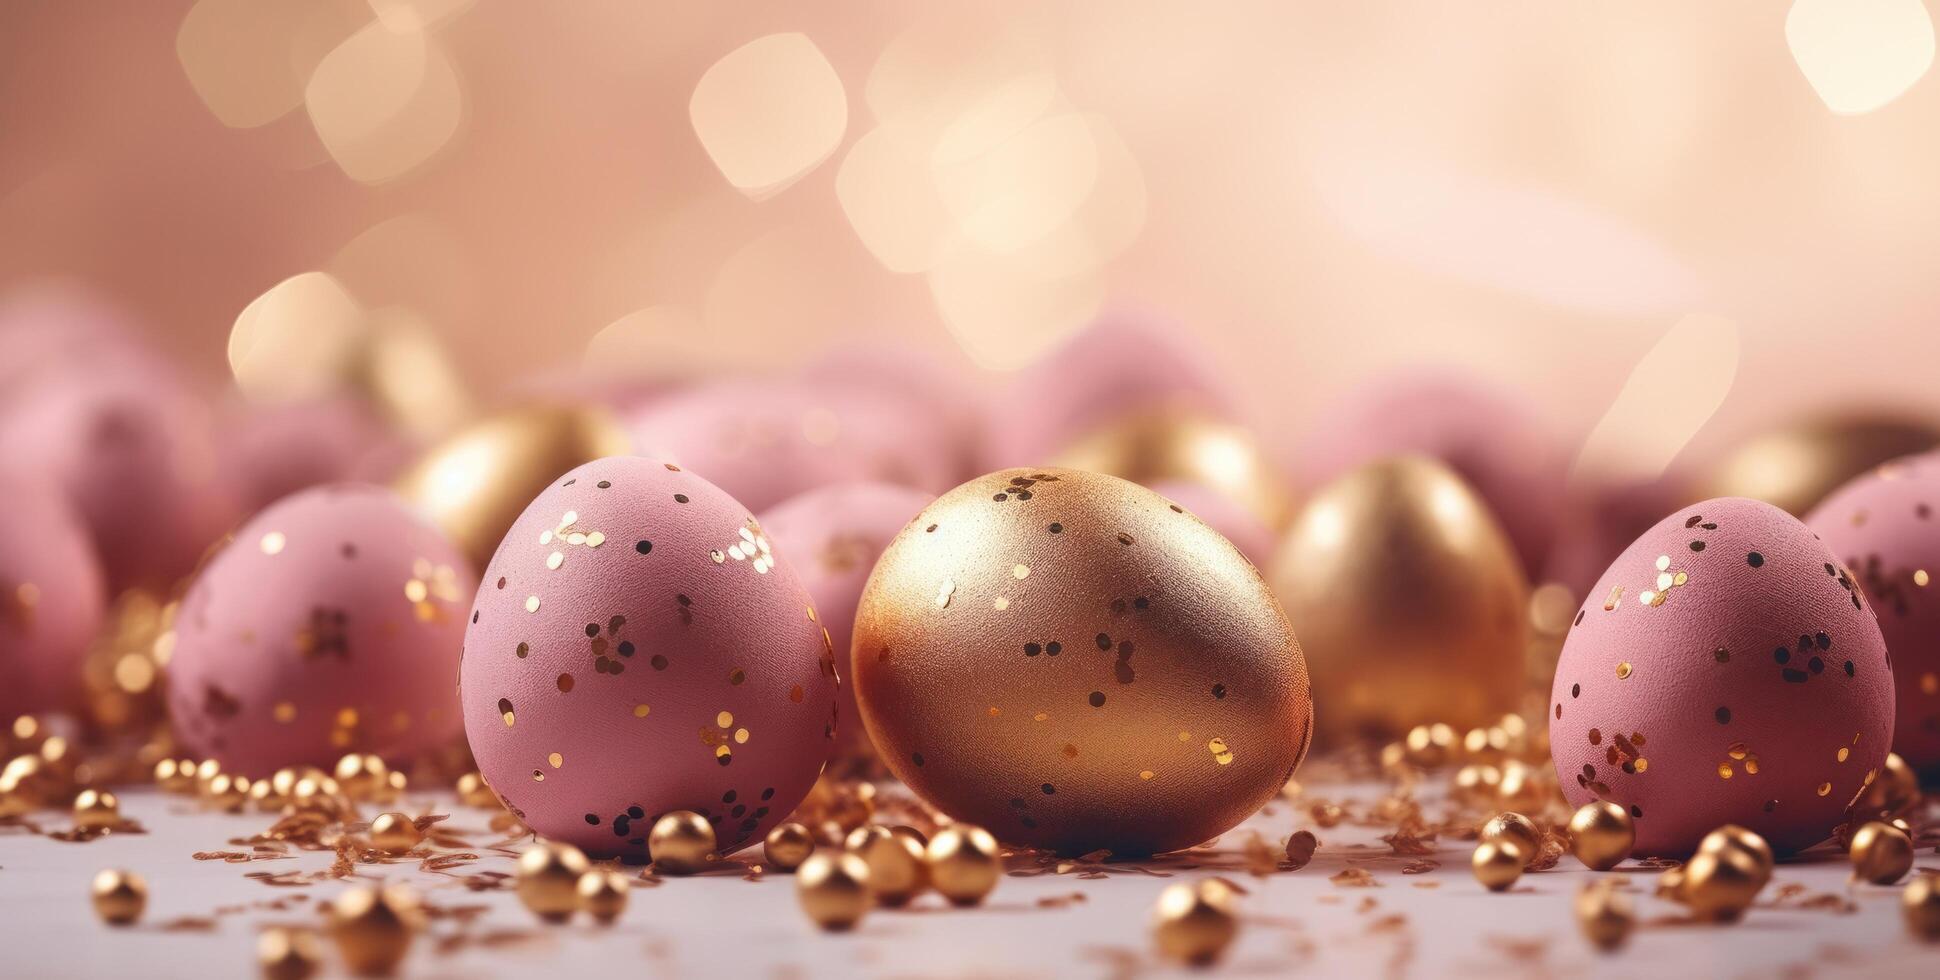 AI generated an image of gold decorated eggs bursting through pink air photo